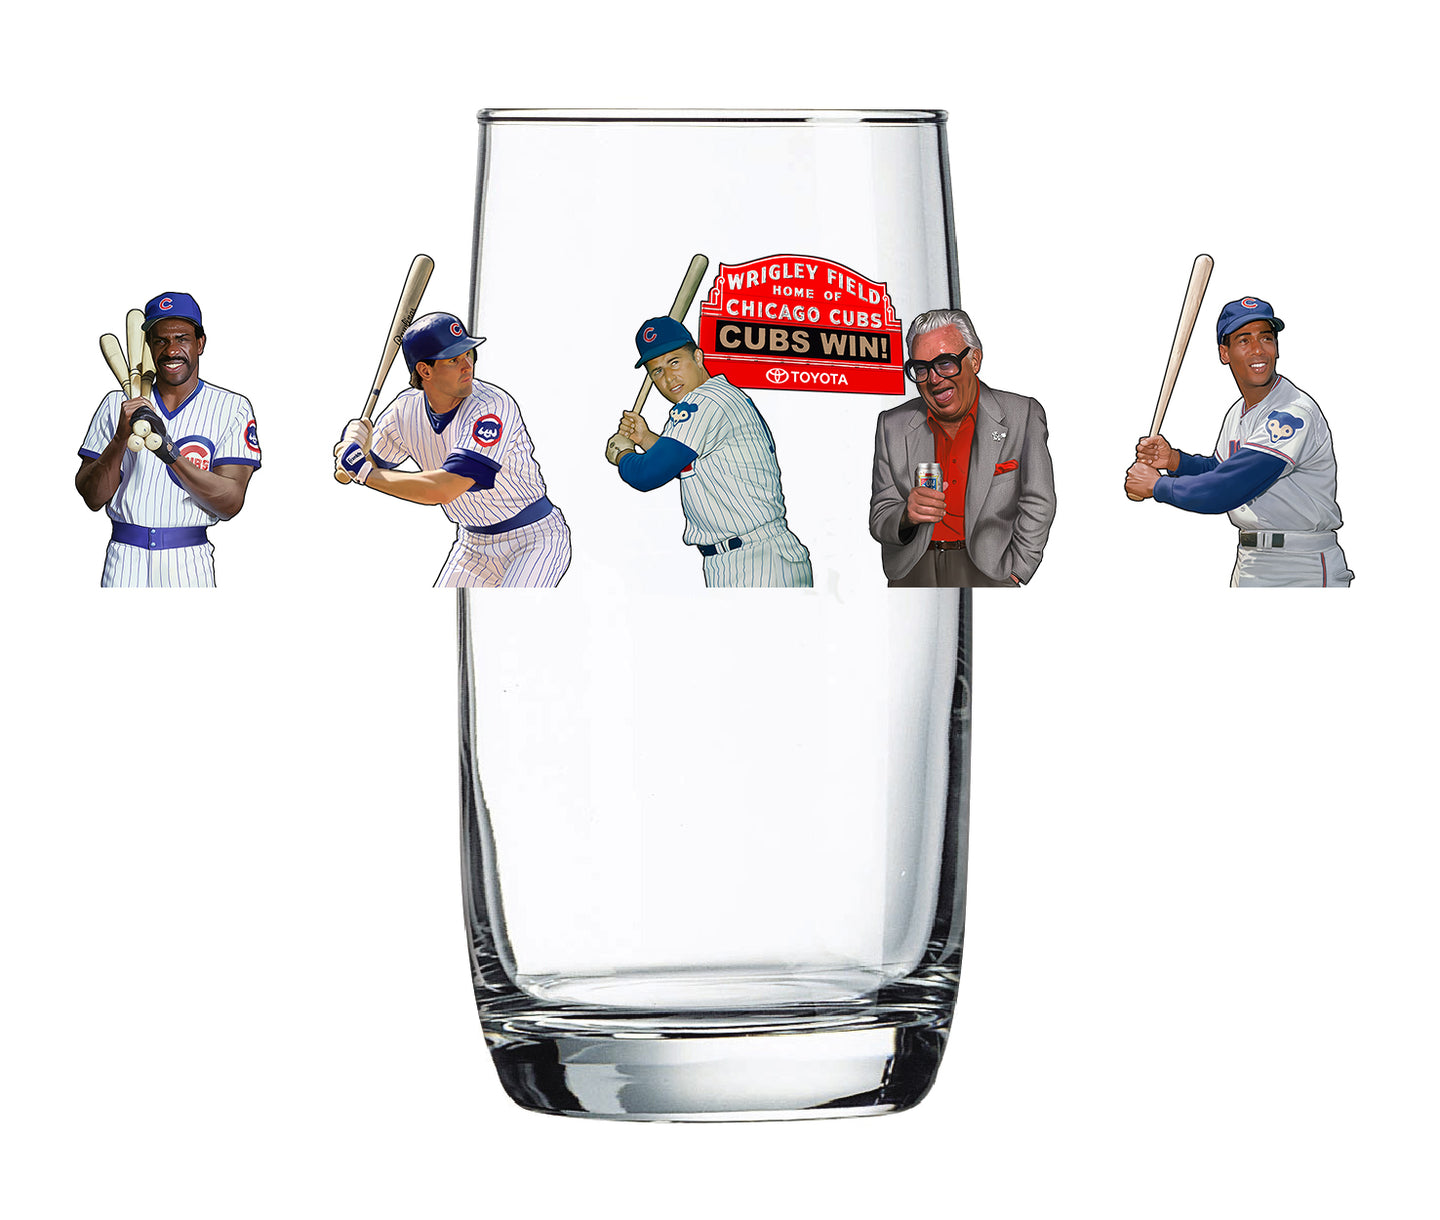 Cubs Win! - PREORDER - Baseball Beer Glass (ships mid Oct)